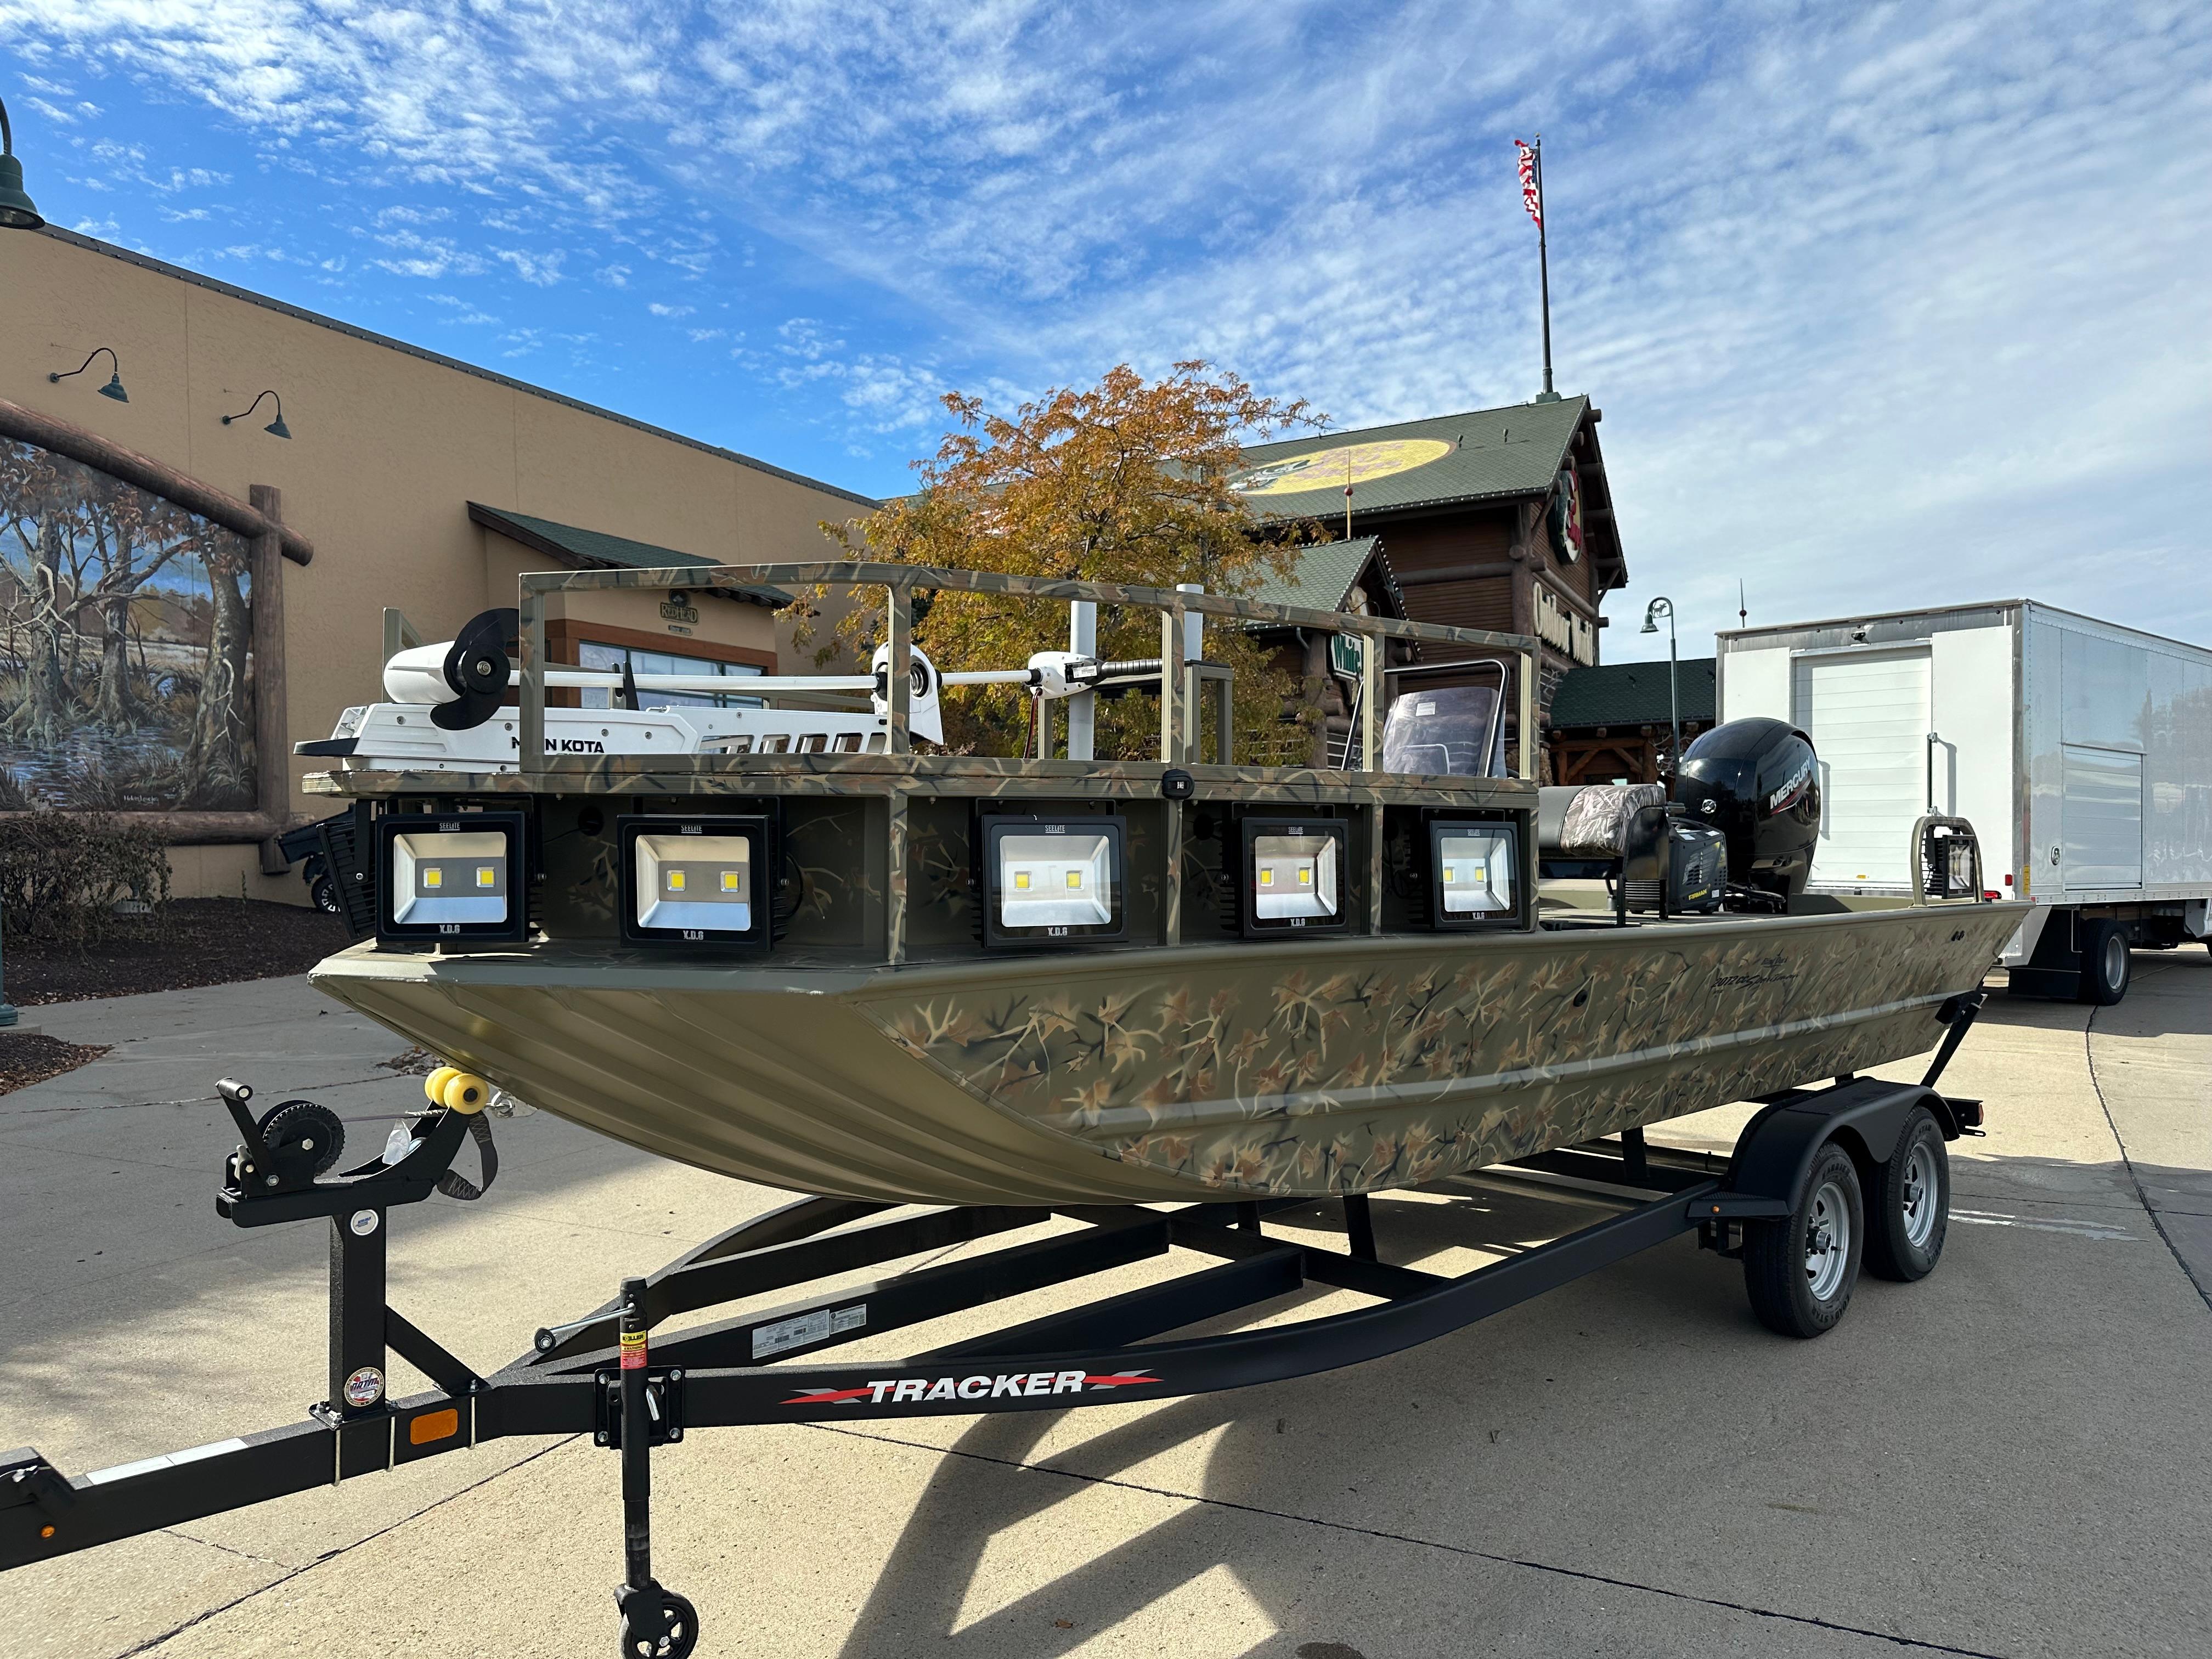 New 2022 Tracker Grizzly 2072 CC Sportsman, 50009 Altoona - Boat Trader